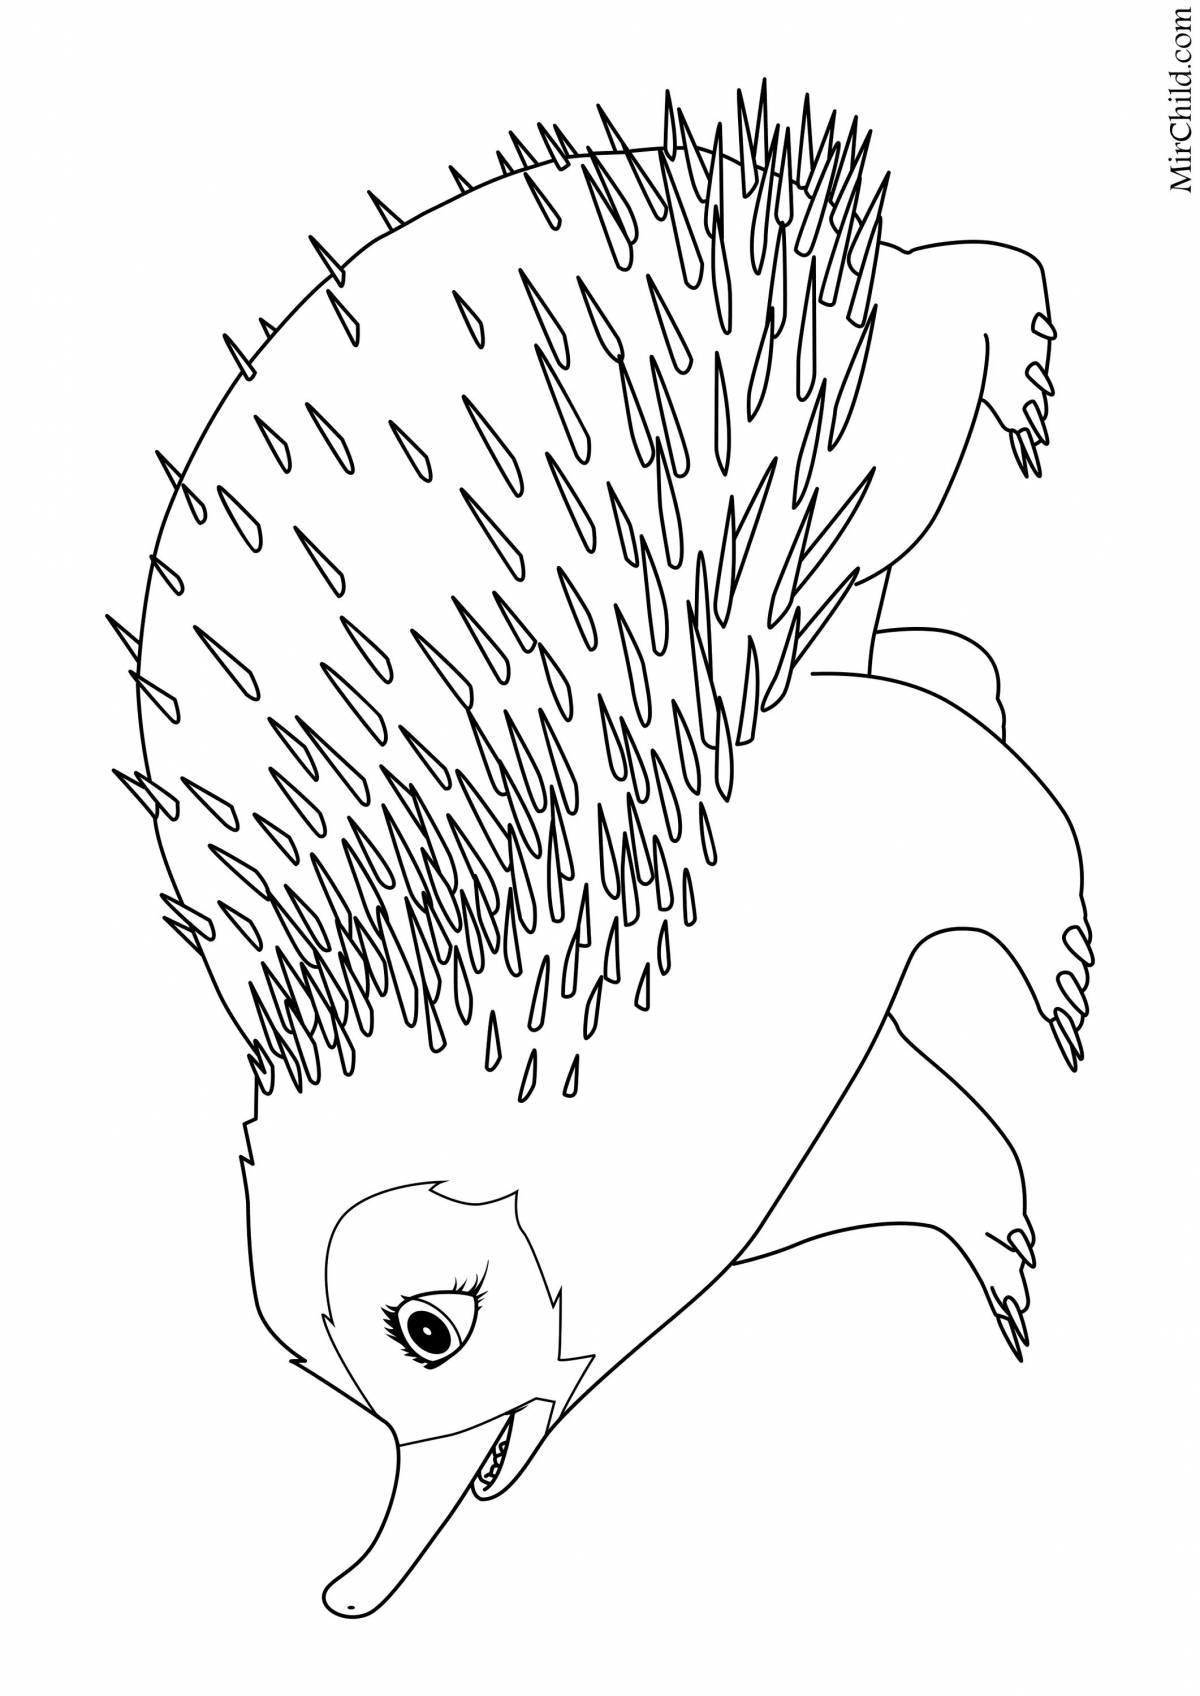 Colorful echidna coloring page